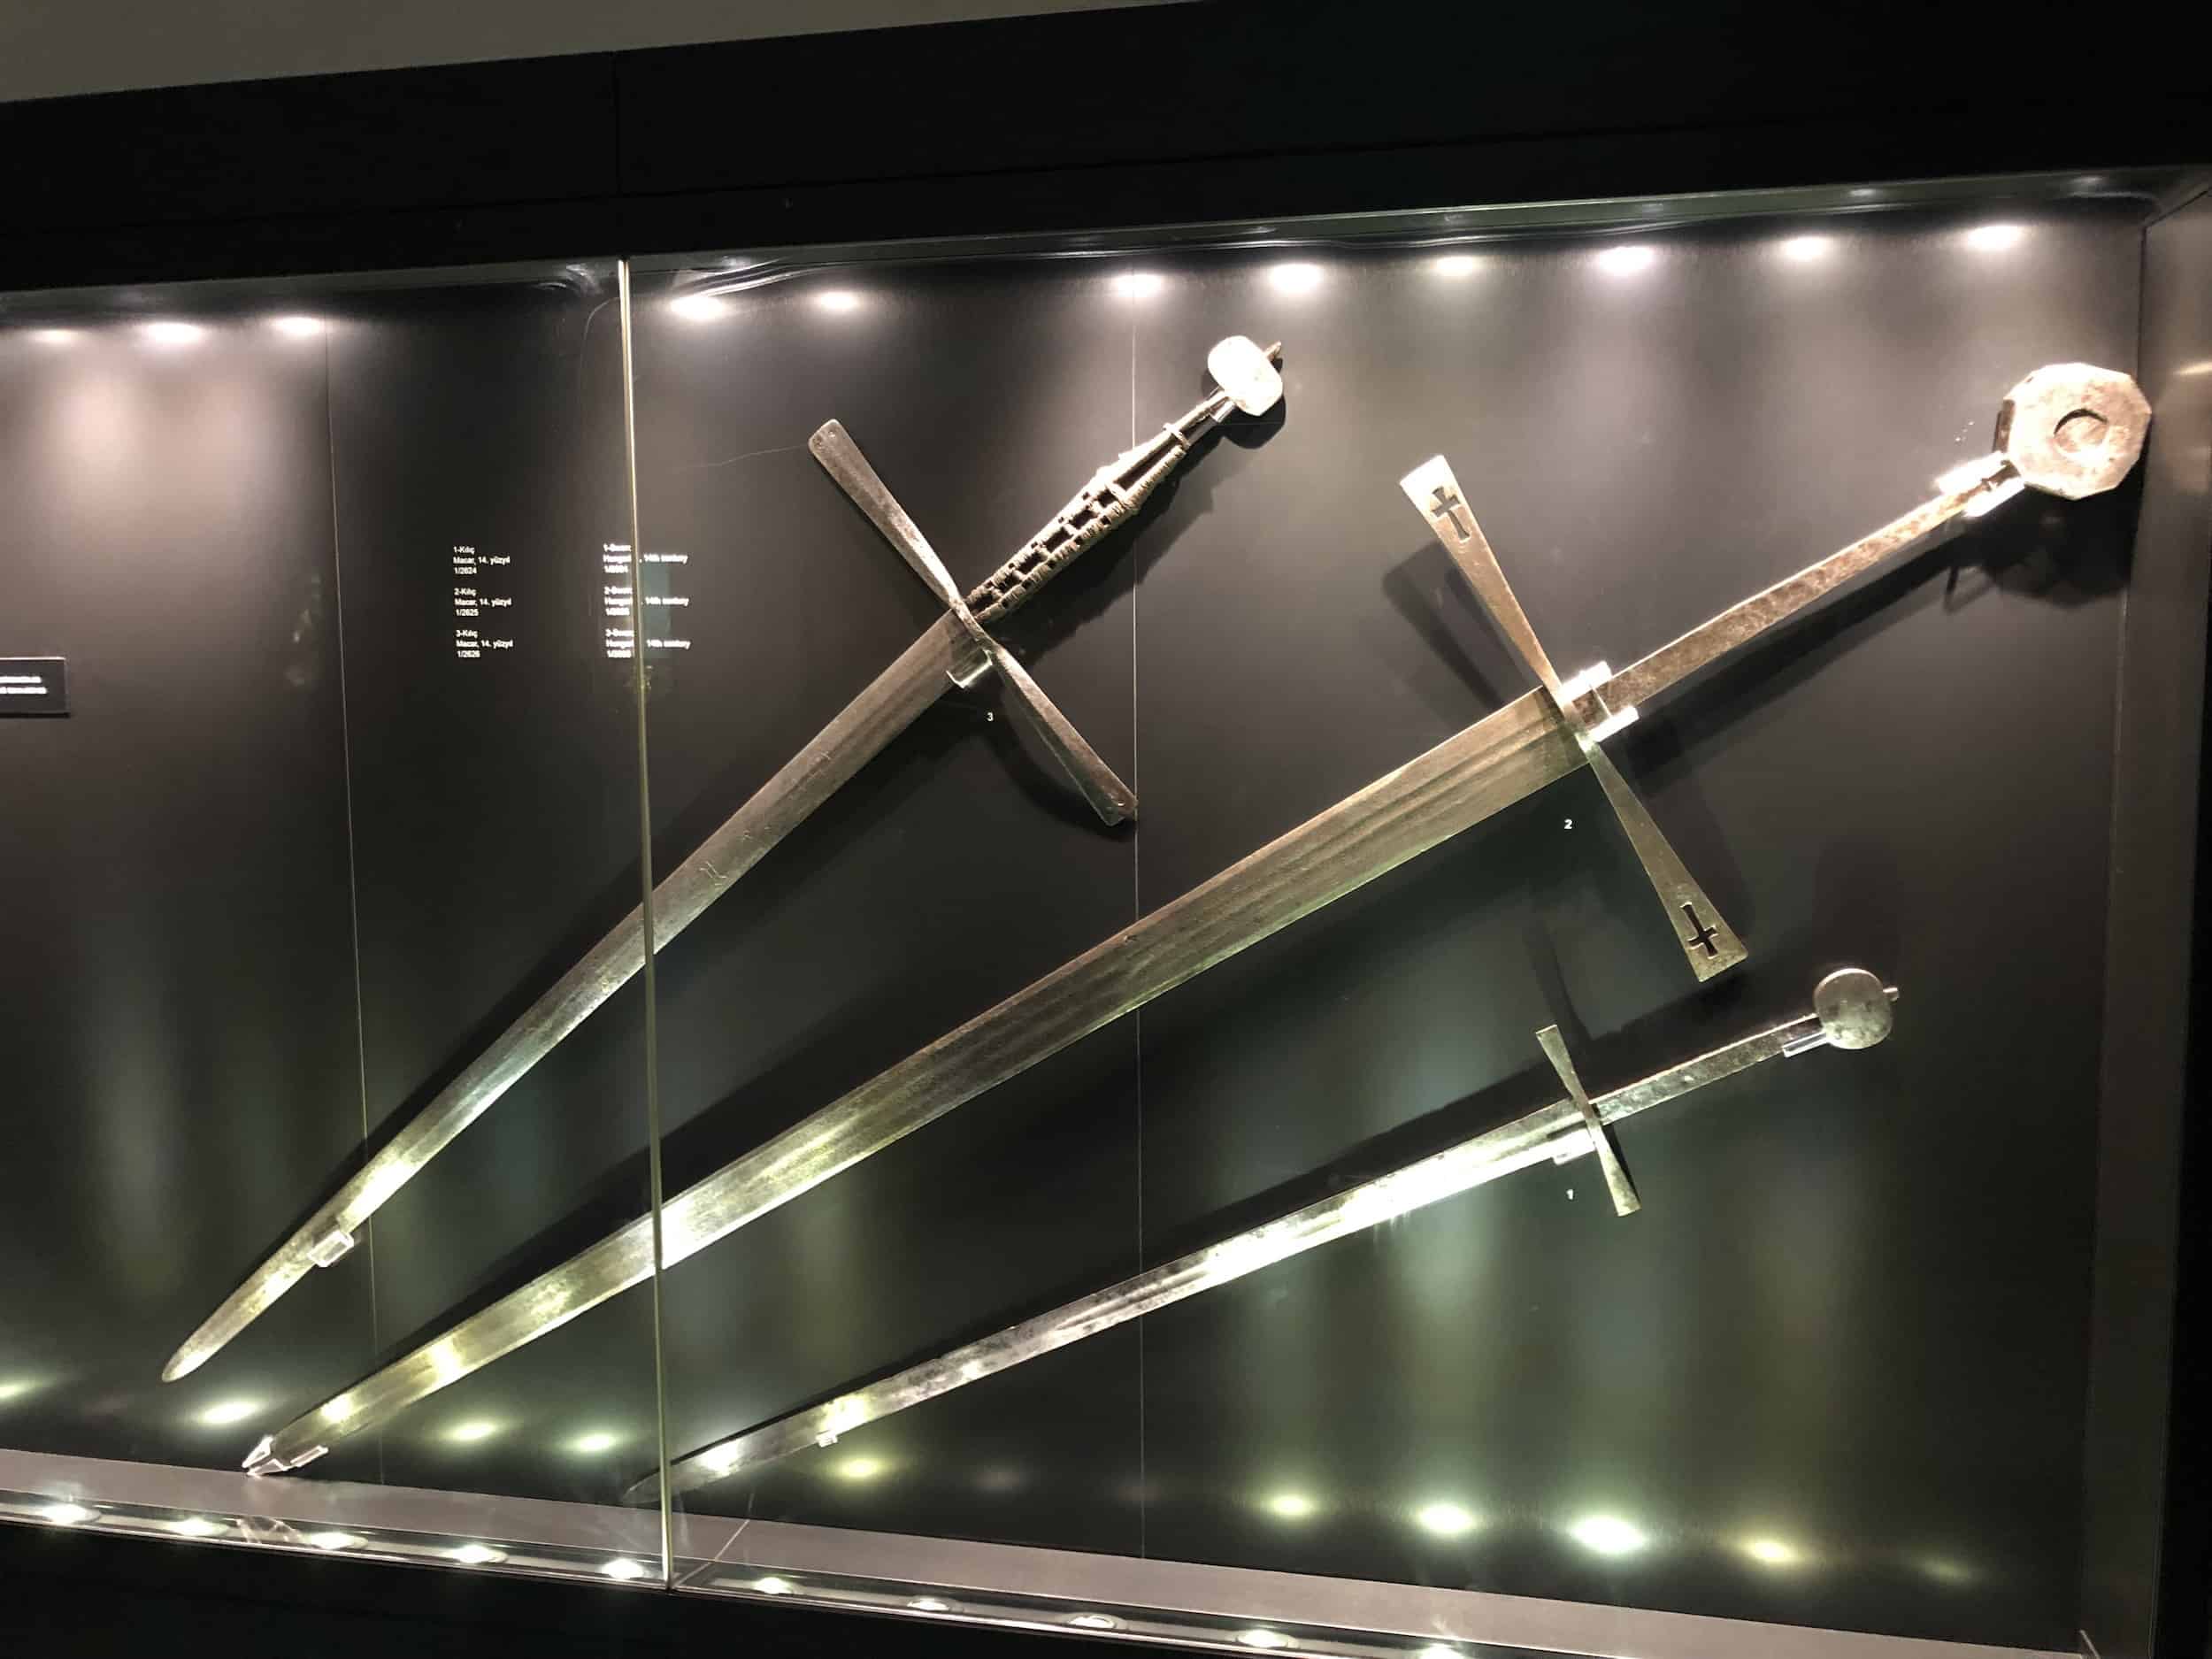 14th century Hungarian swords in the weapons collection at Topkapi Palace in Istanbul, Turkey